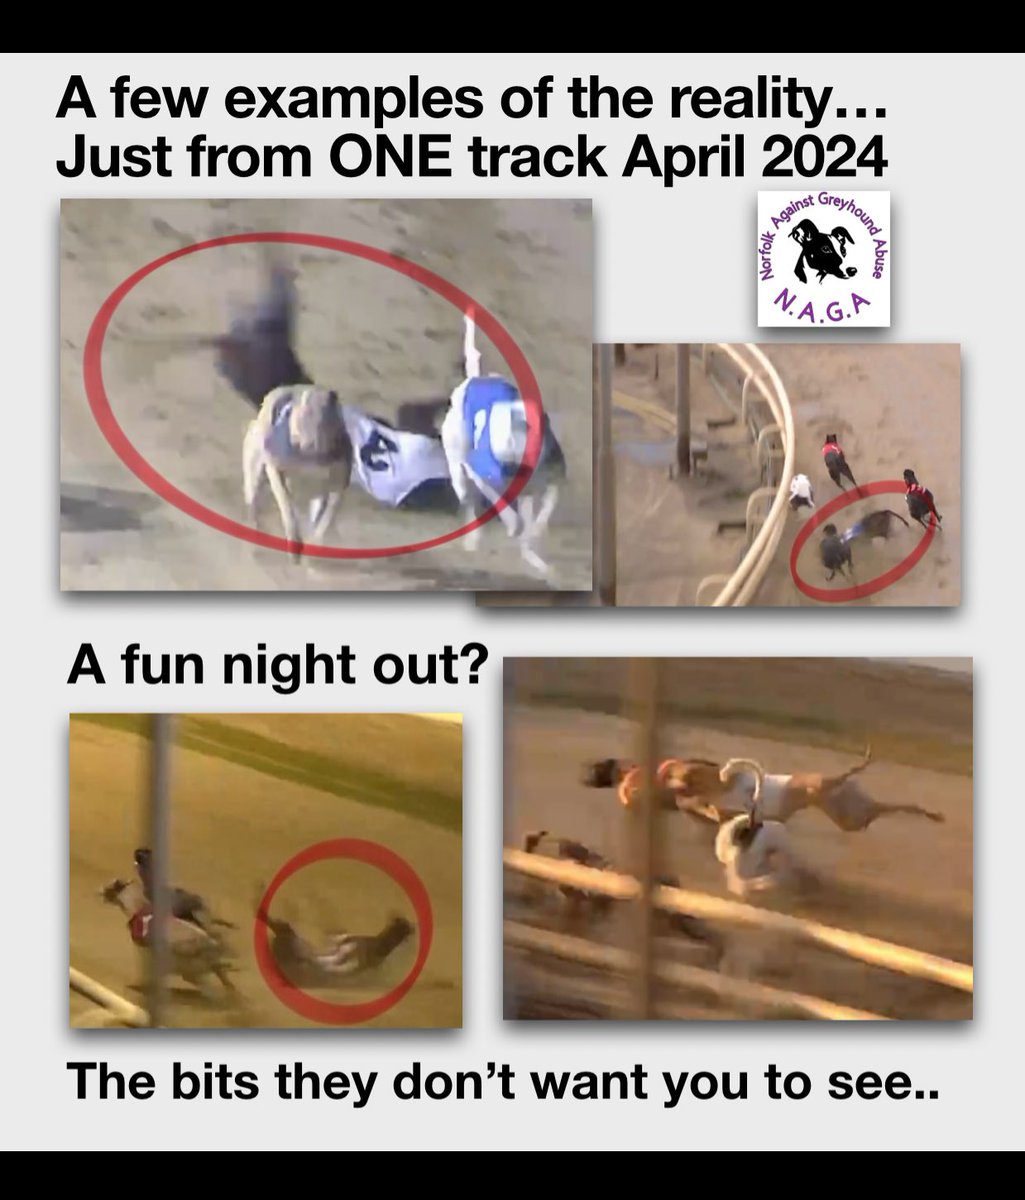 The GBGB claims it wants a ‘good life for every greyhound’. How can that be true when horrific falls are happening regularly? Maybe the gambling industry wants the falls? Money is always at the heart of all they do! #bangreyhoundracing